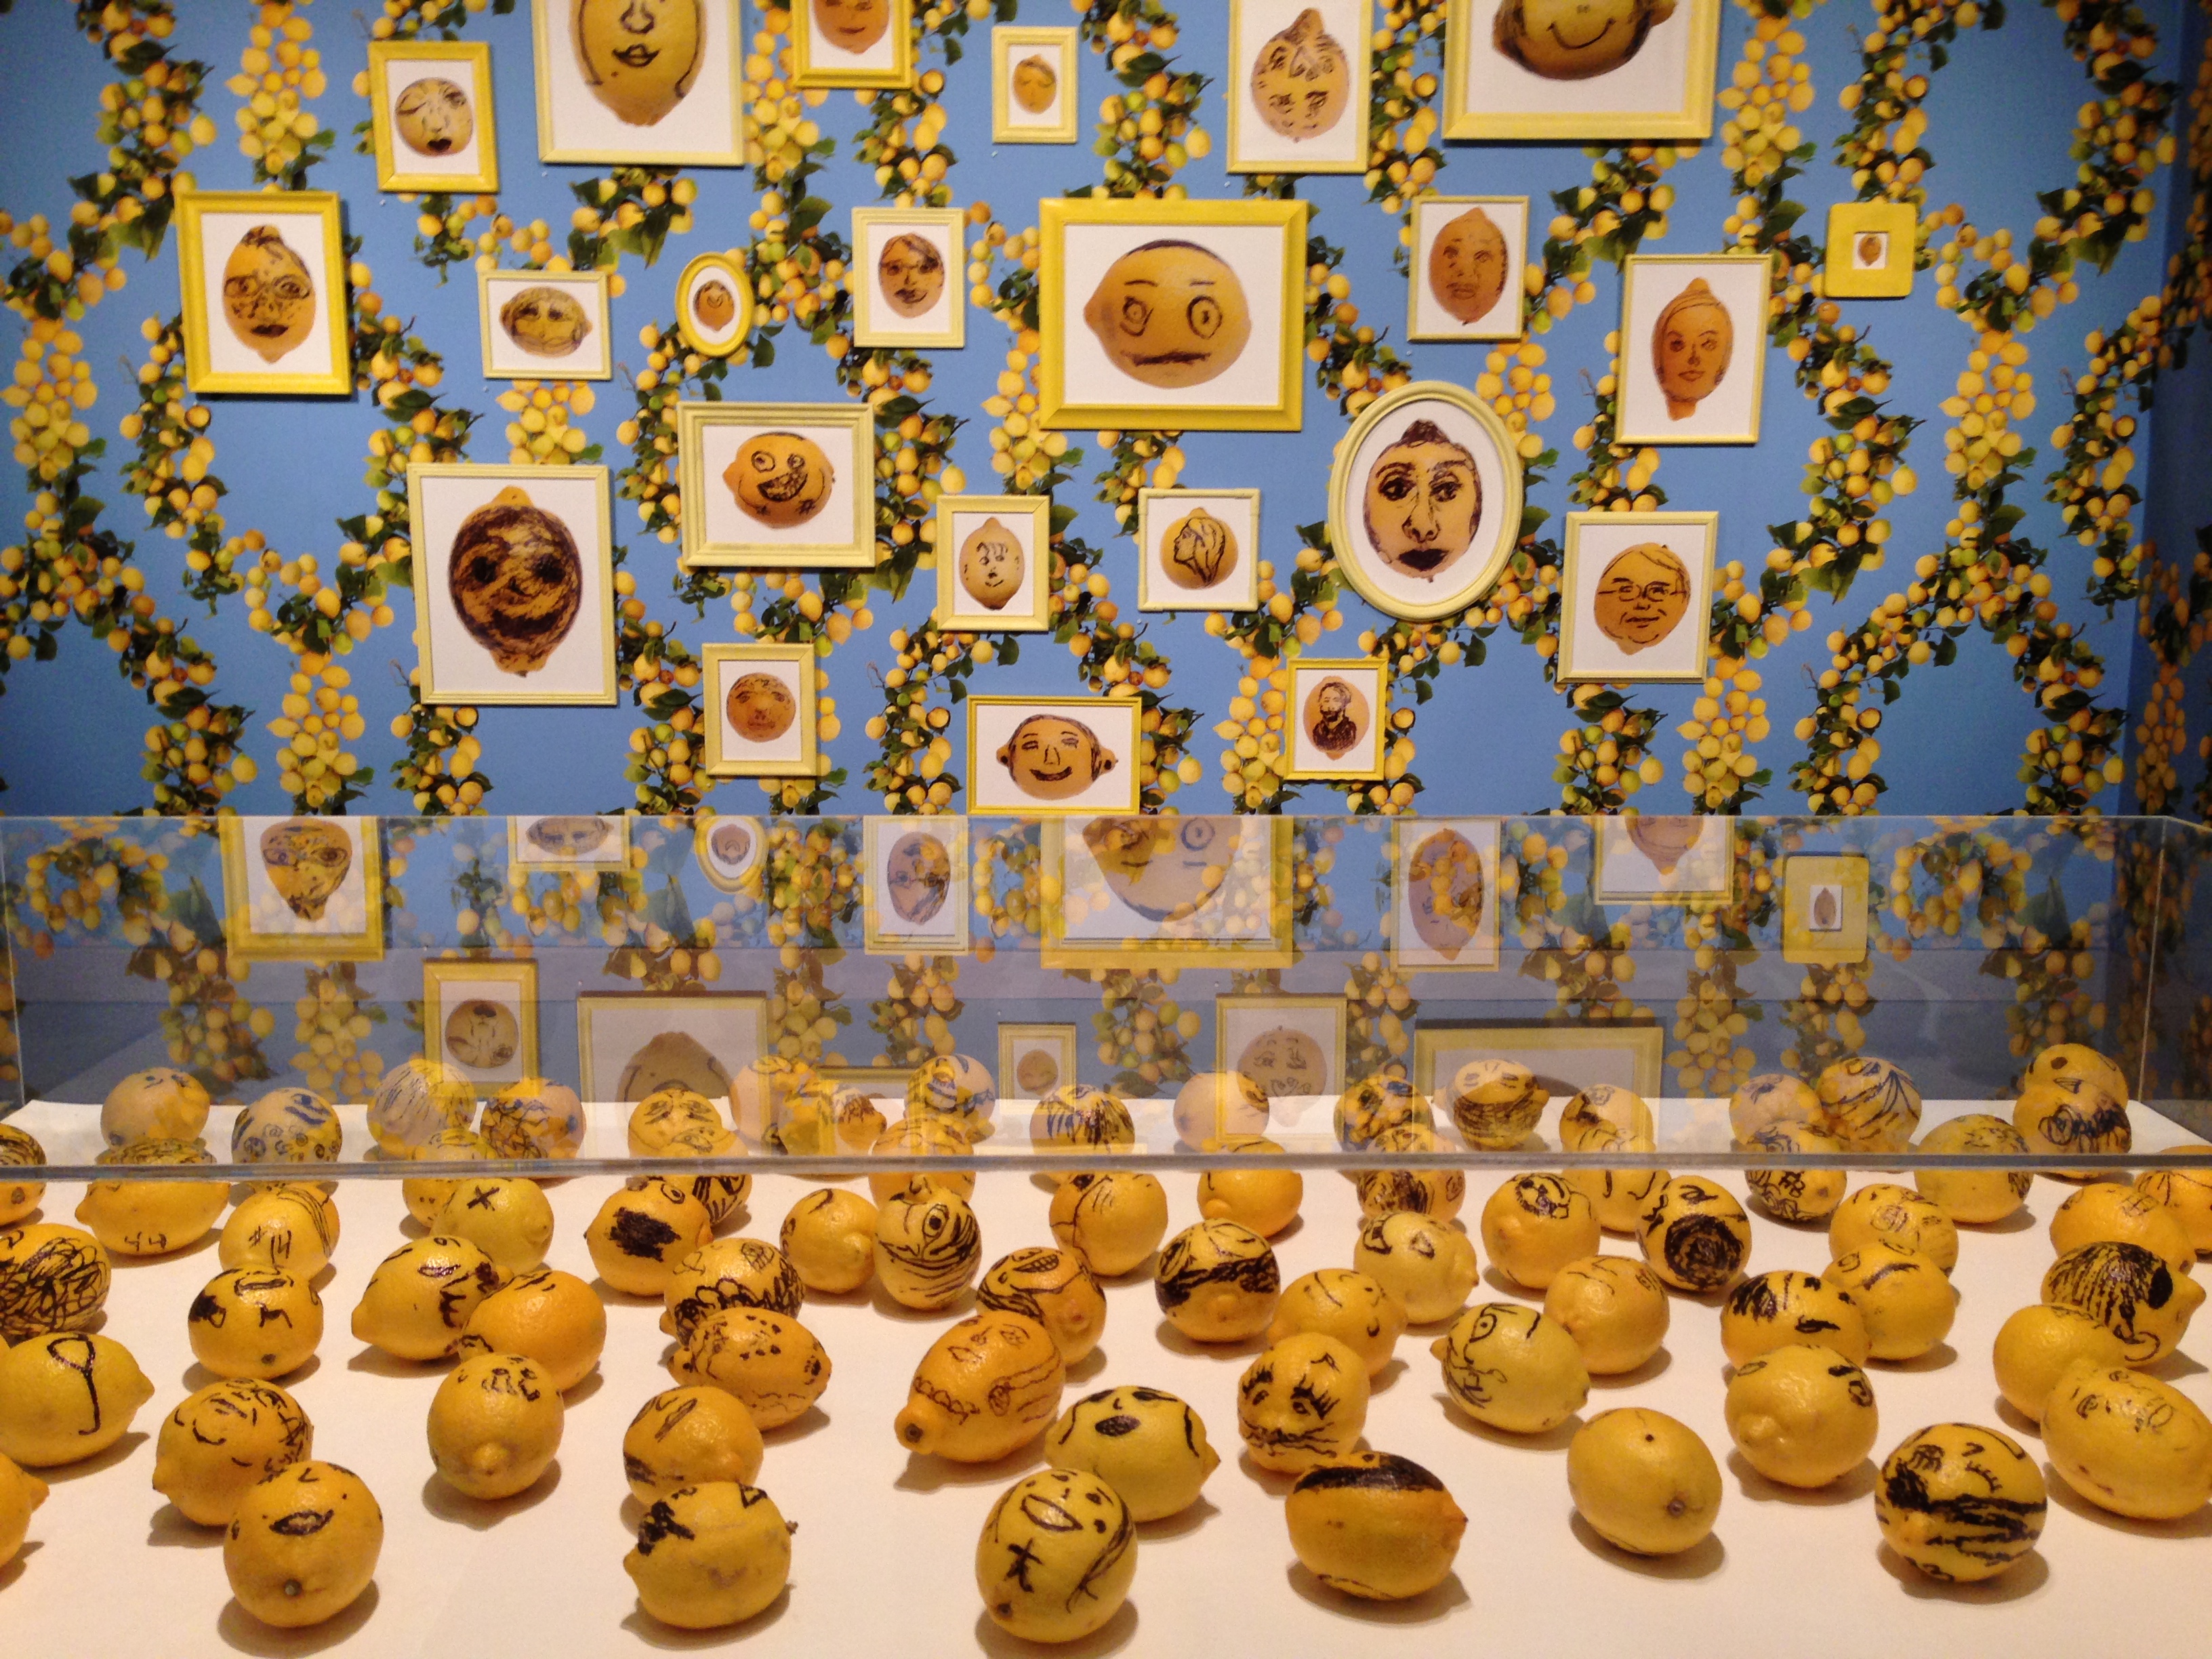 A bunch of lemons with faces drawn on them, sit's in a gallery